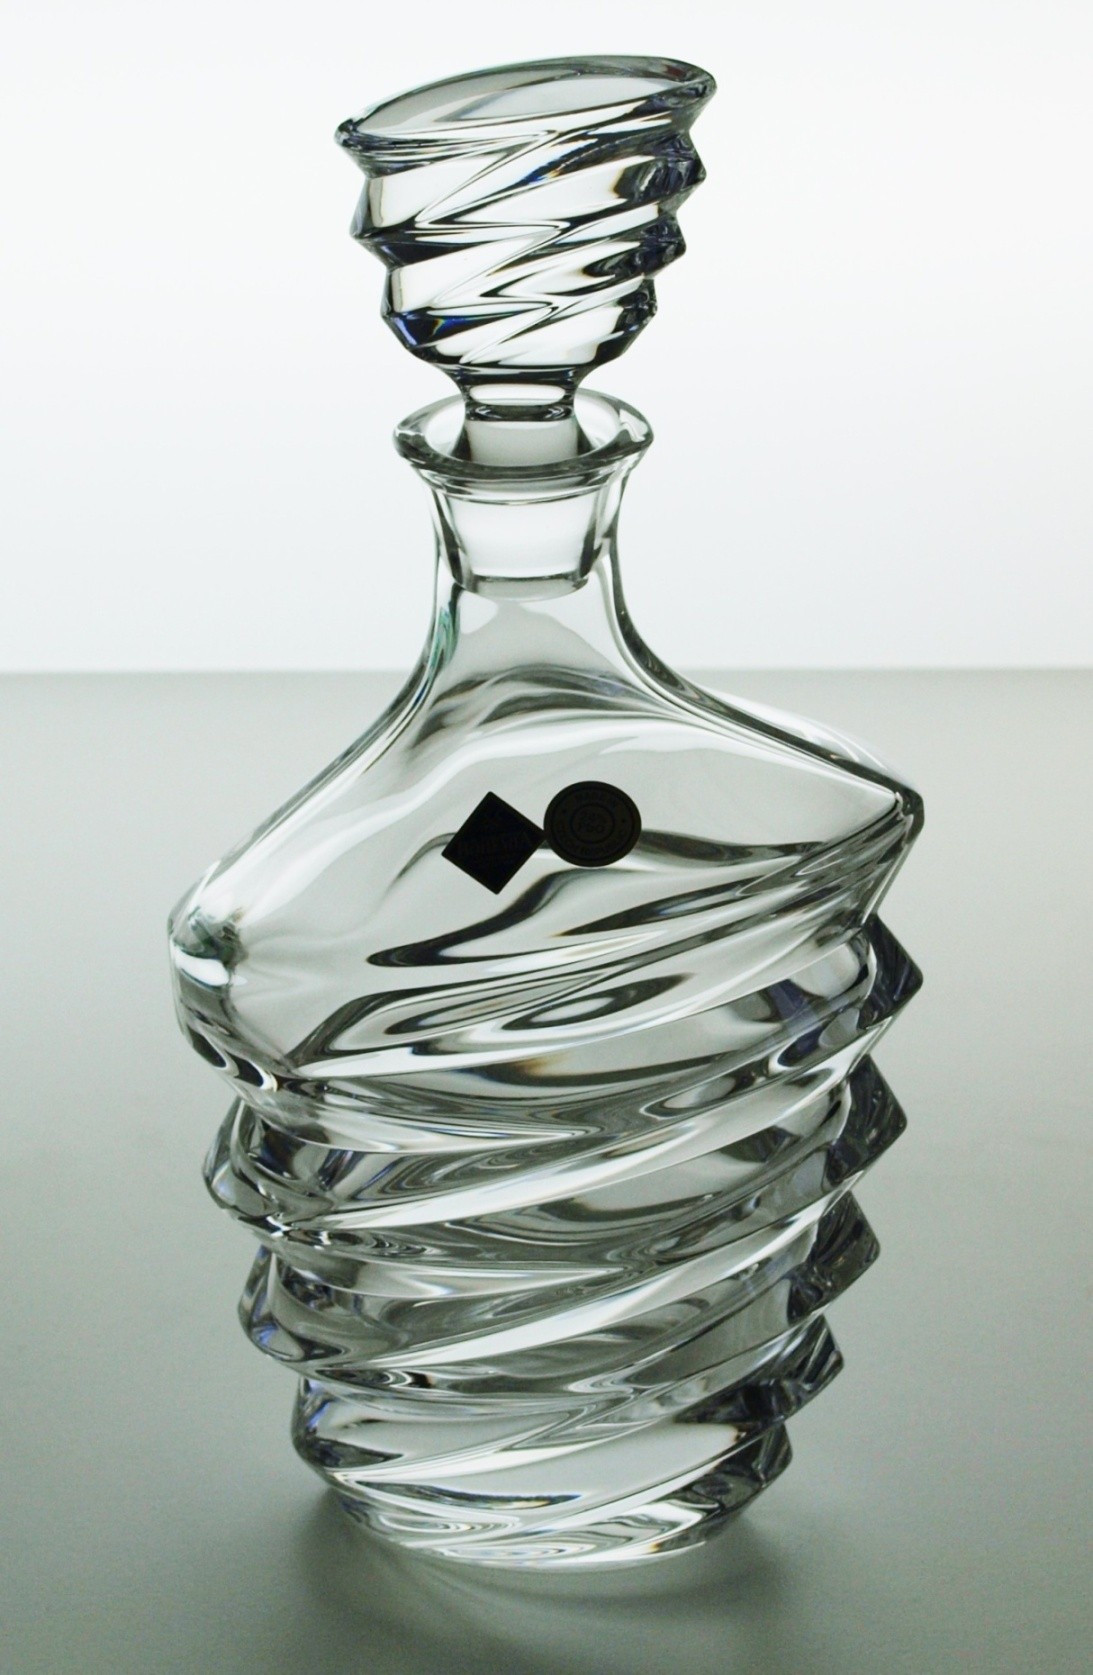 24 Spectacular Bohemia Czech Republic Lead Crystal Vase 2024 free download bohemia czech republic lead crystal vase of decanter with unique modern design made from full lead crystal regarding whisky decanter dynamic